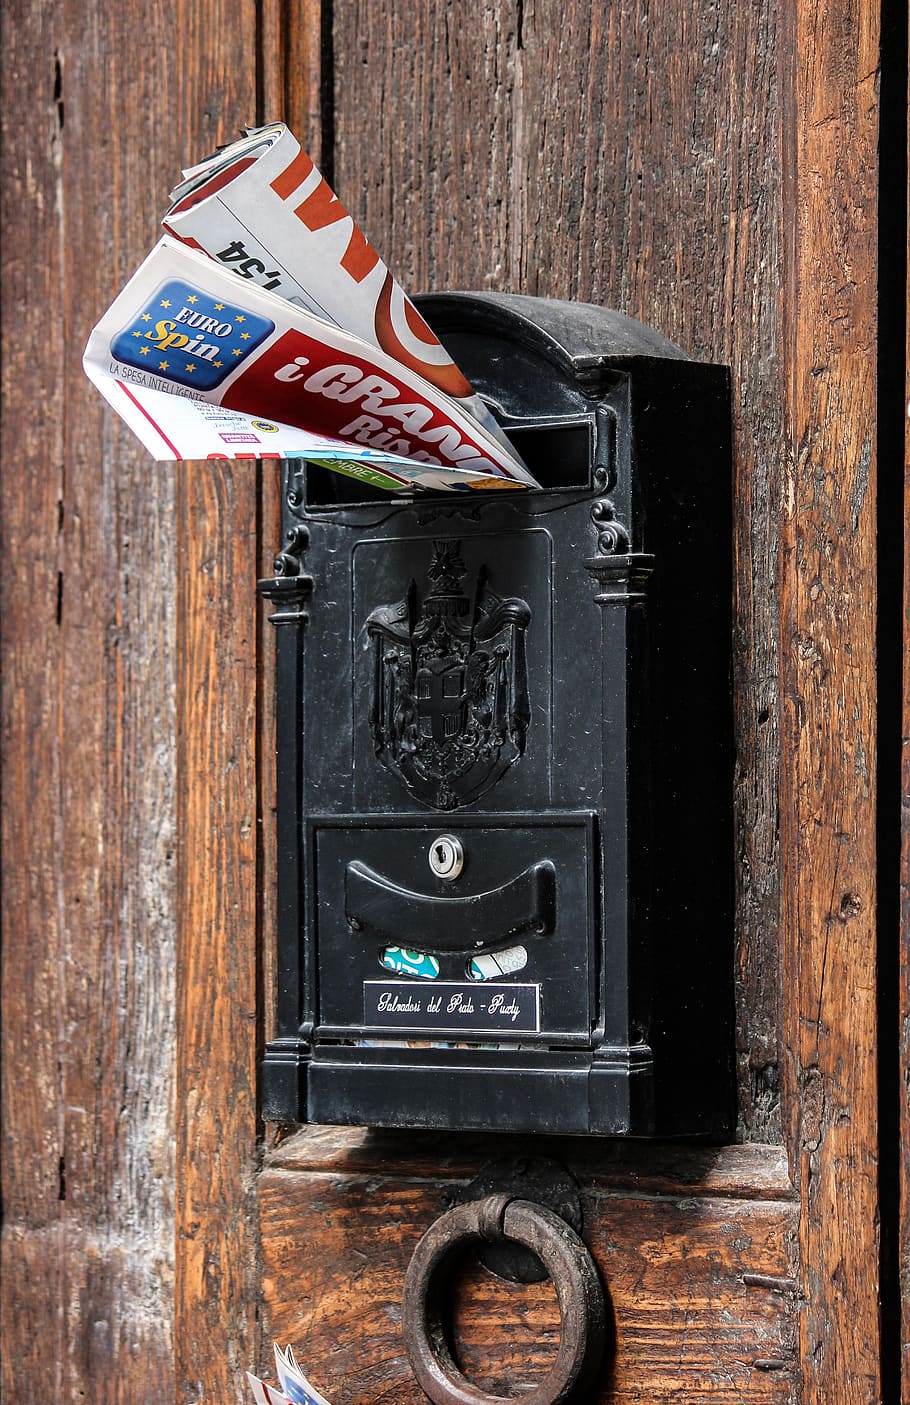 mailbox, mail, newspaper, communication, wood - material, finance, close-up, indoors, technology, paper currency